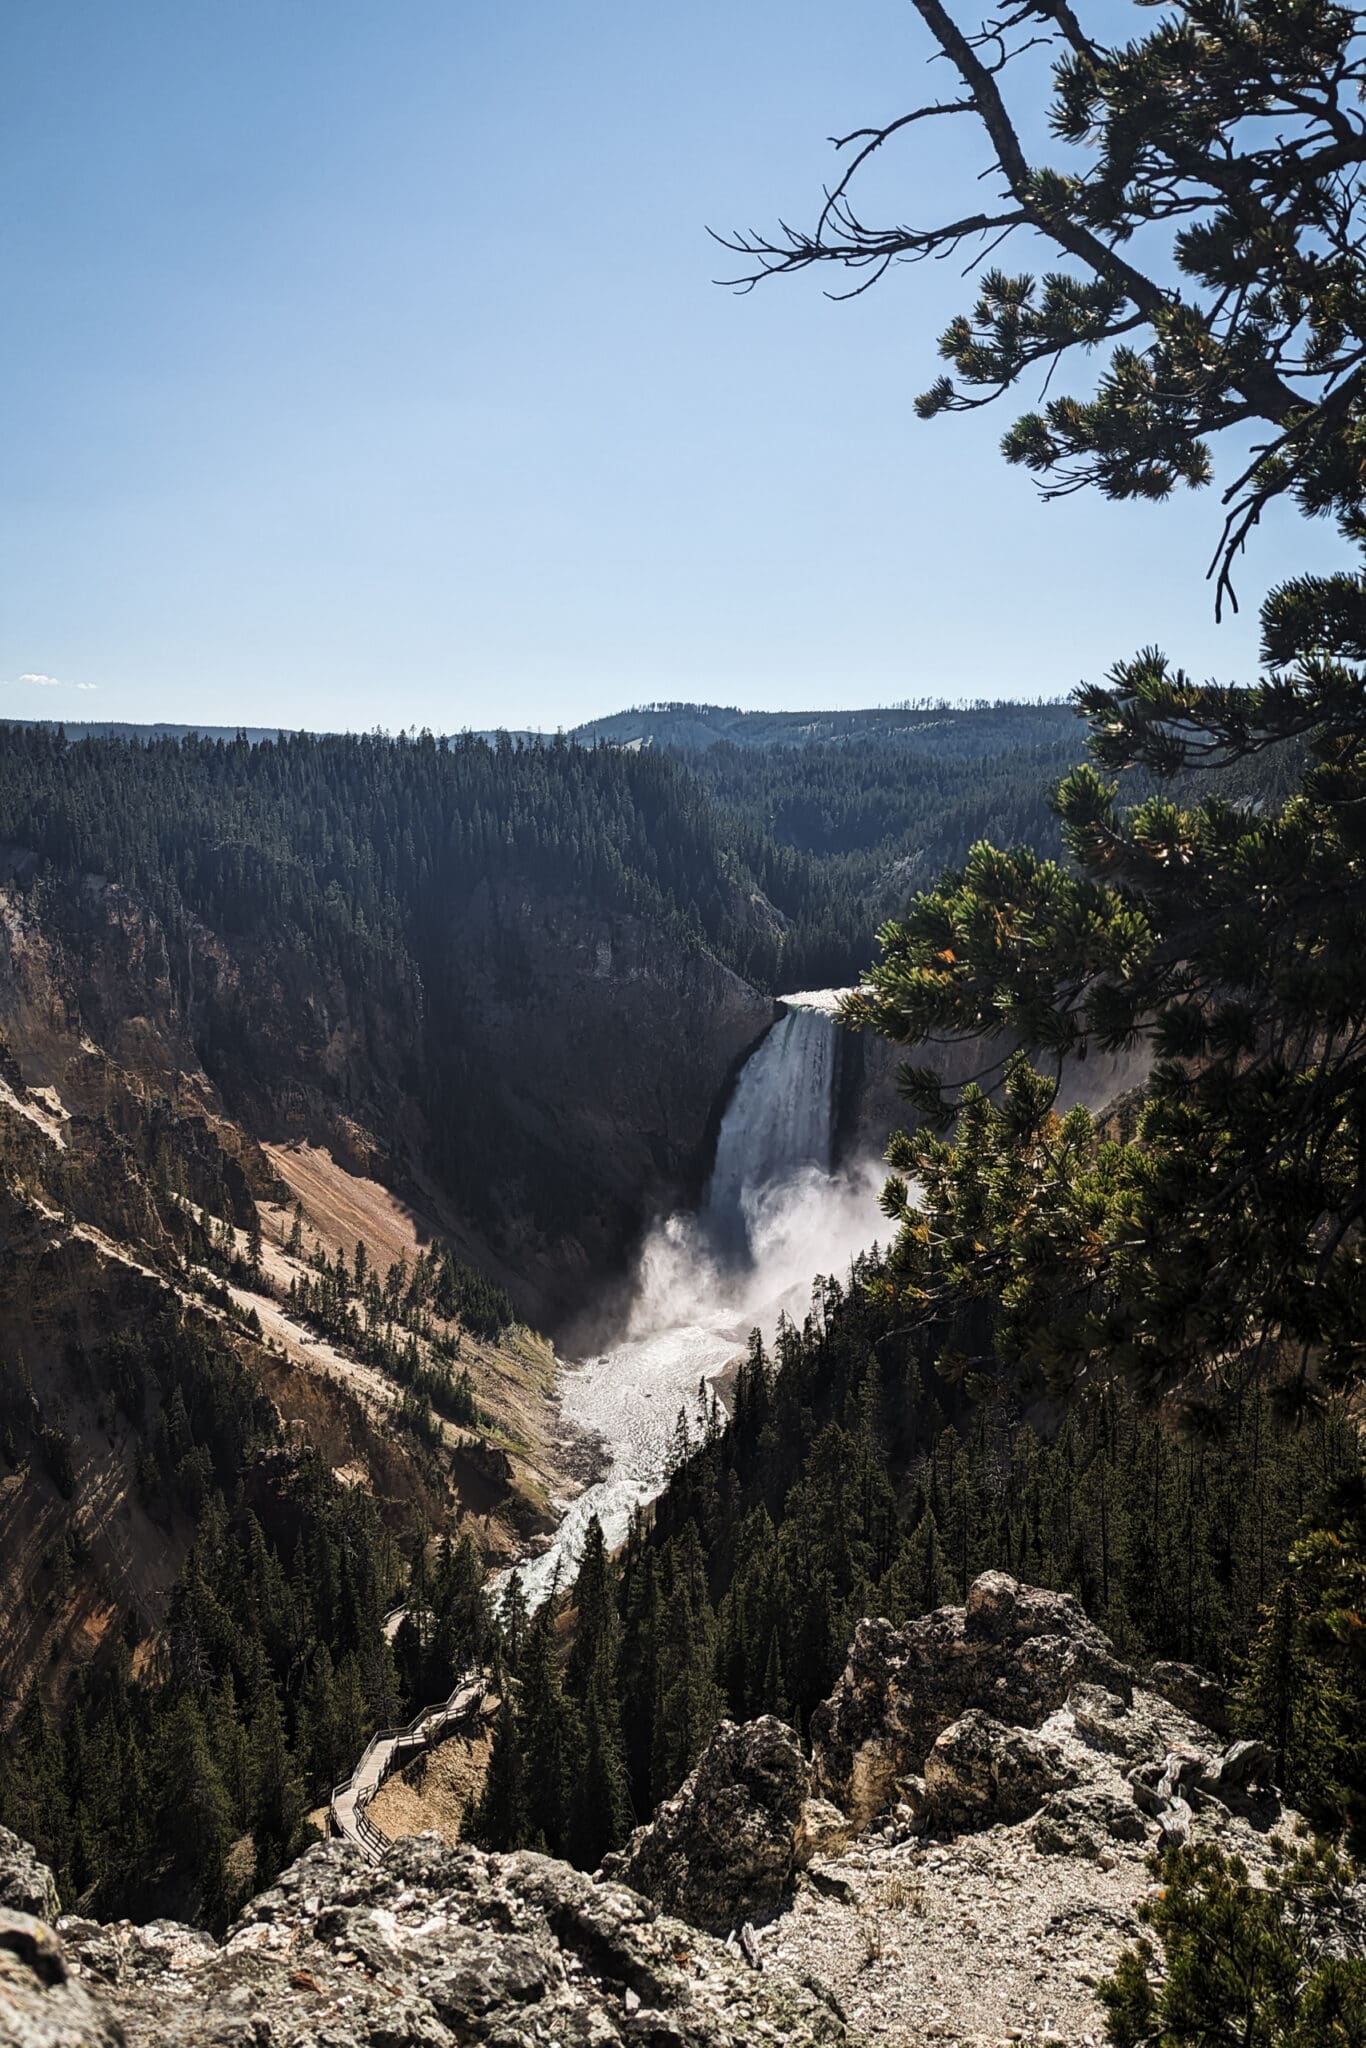 View of Lower Falls, Yellowstone National Park